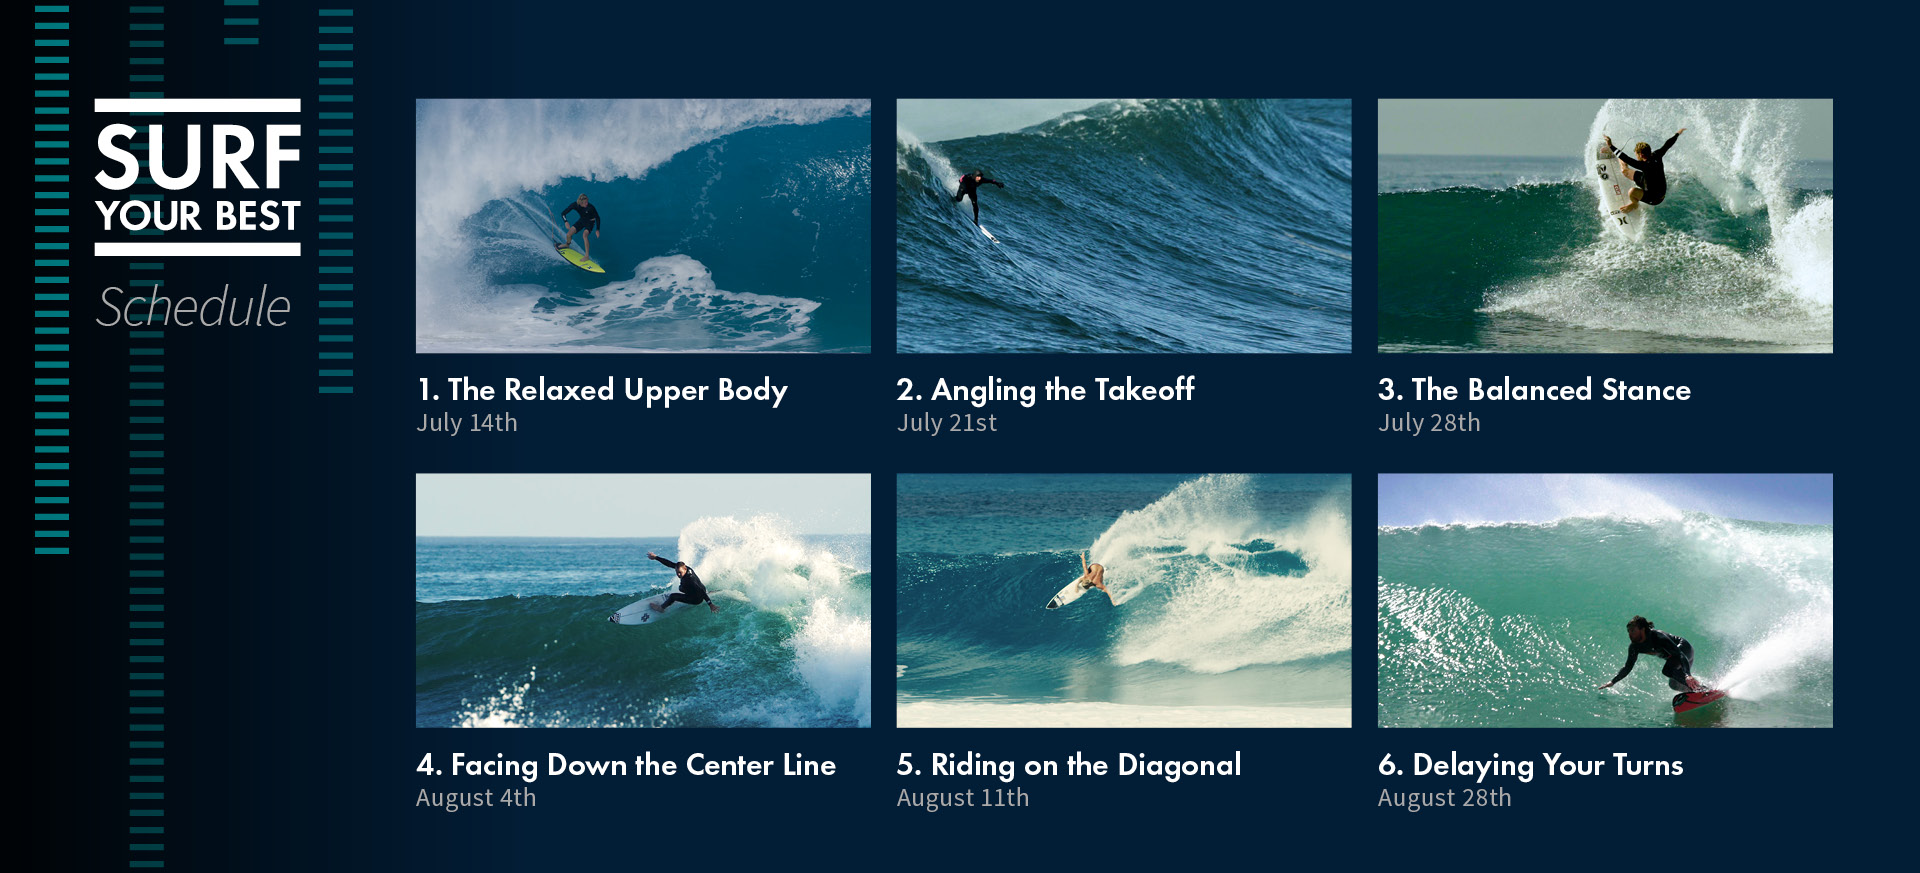 Introducing: Surf Your Best, With Nick Carroll – Surfline.com Surf News